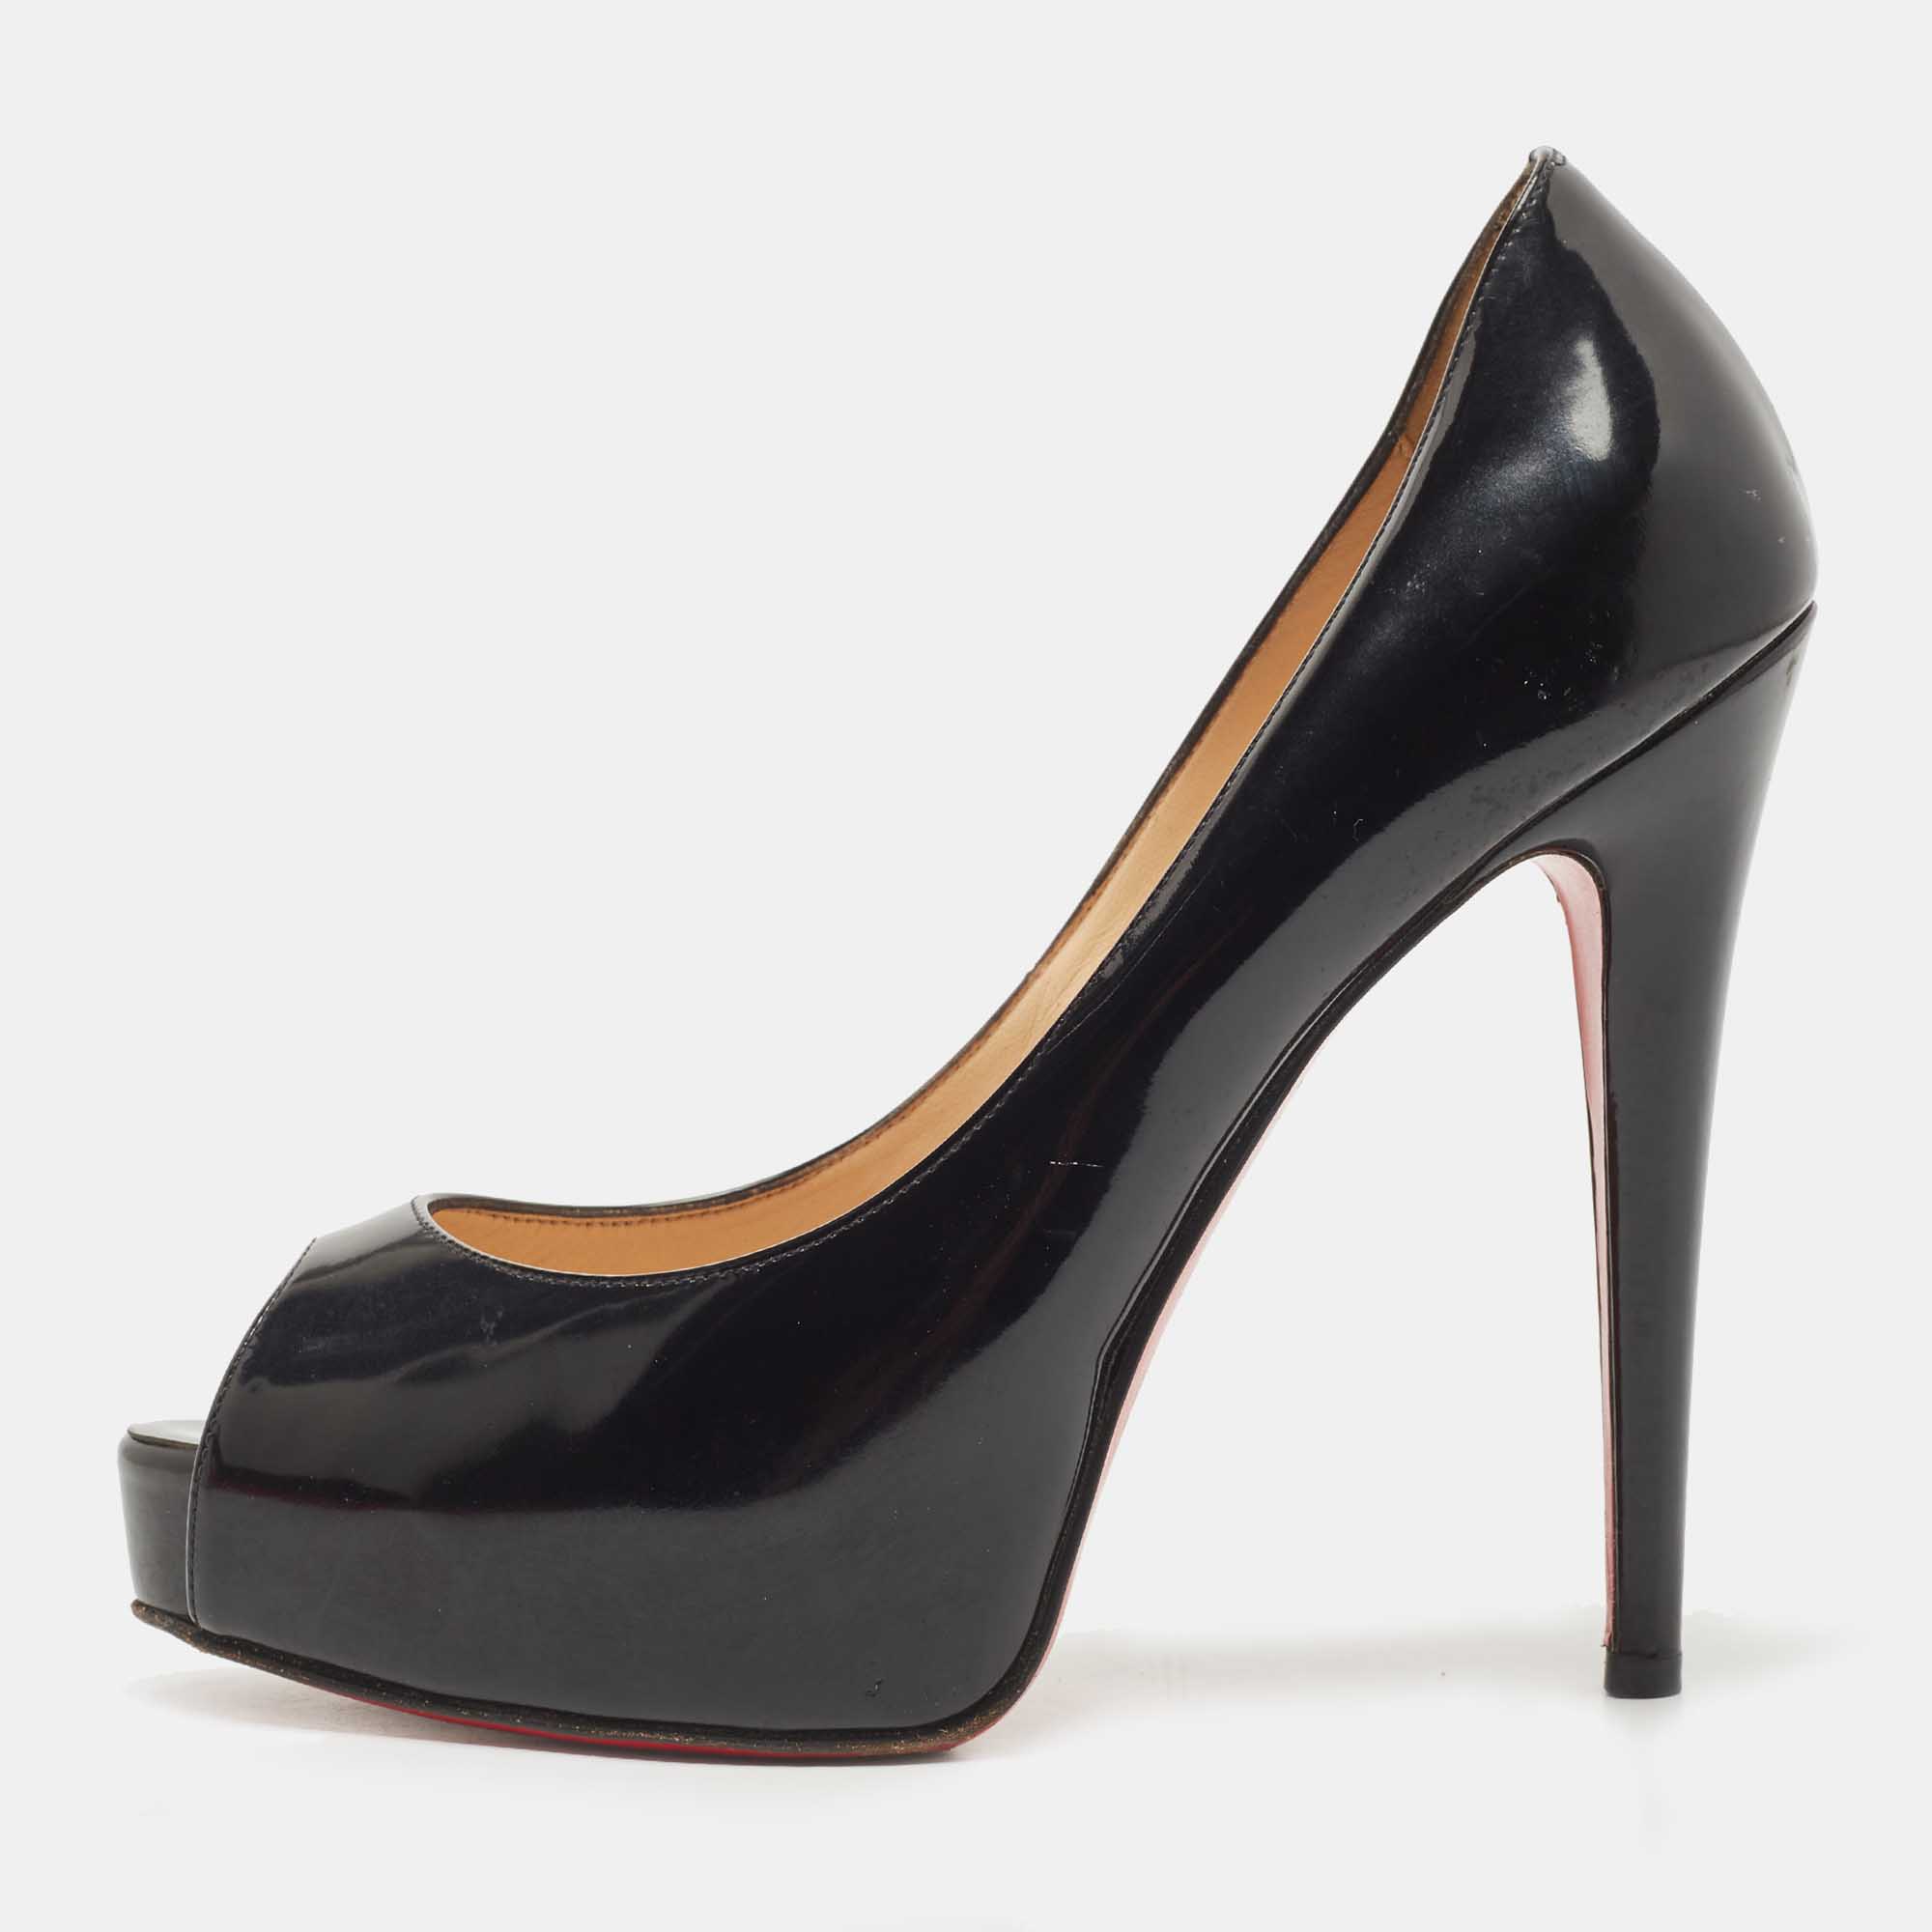 Pre-owned Christian Louboutin Black Patent Leather Very Prive Pumps Size 36.5